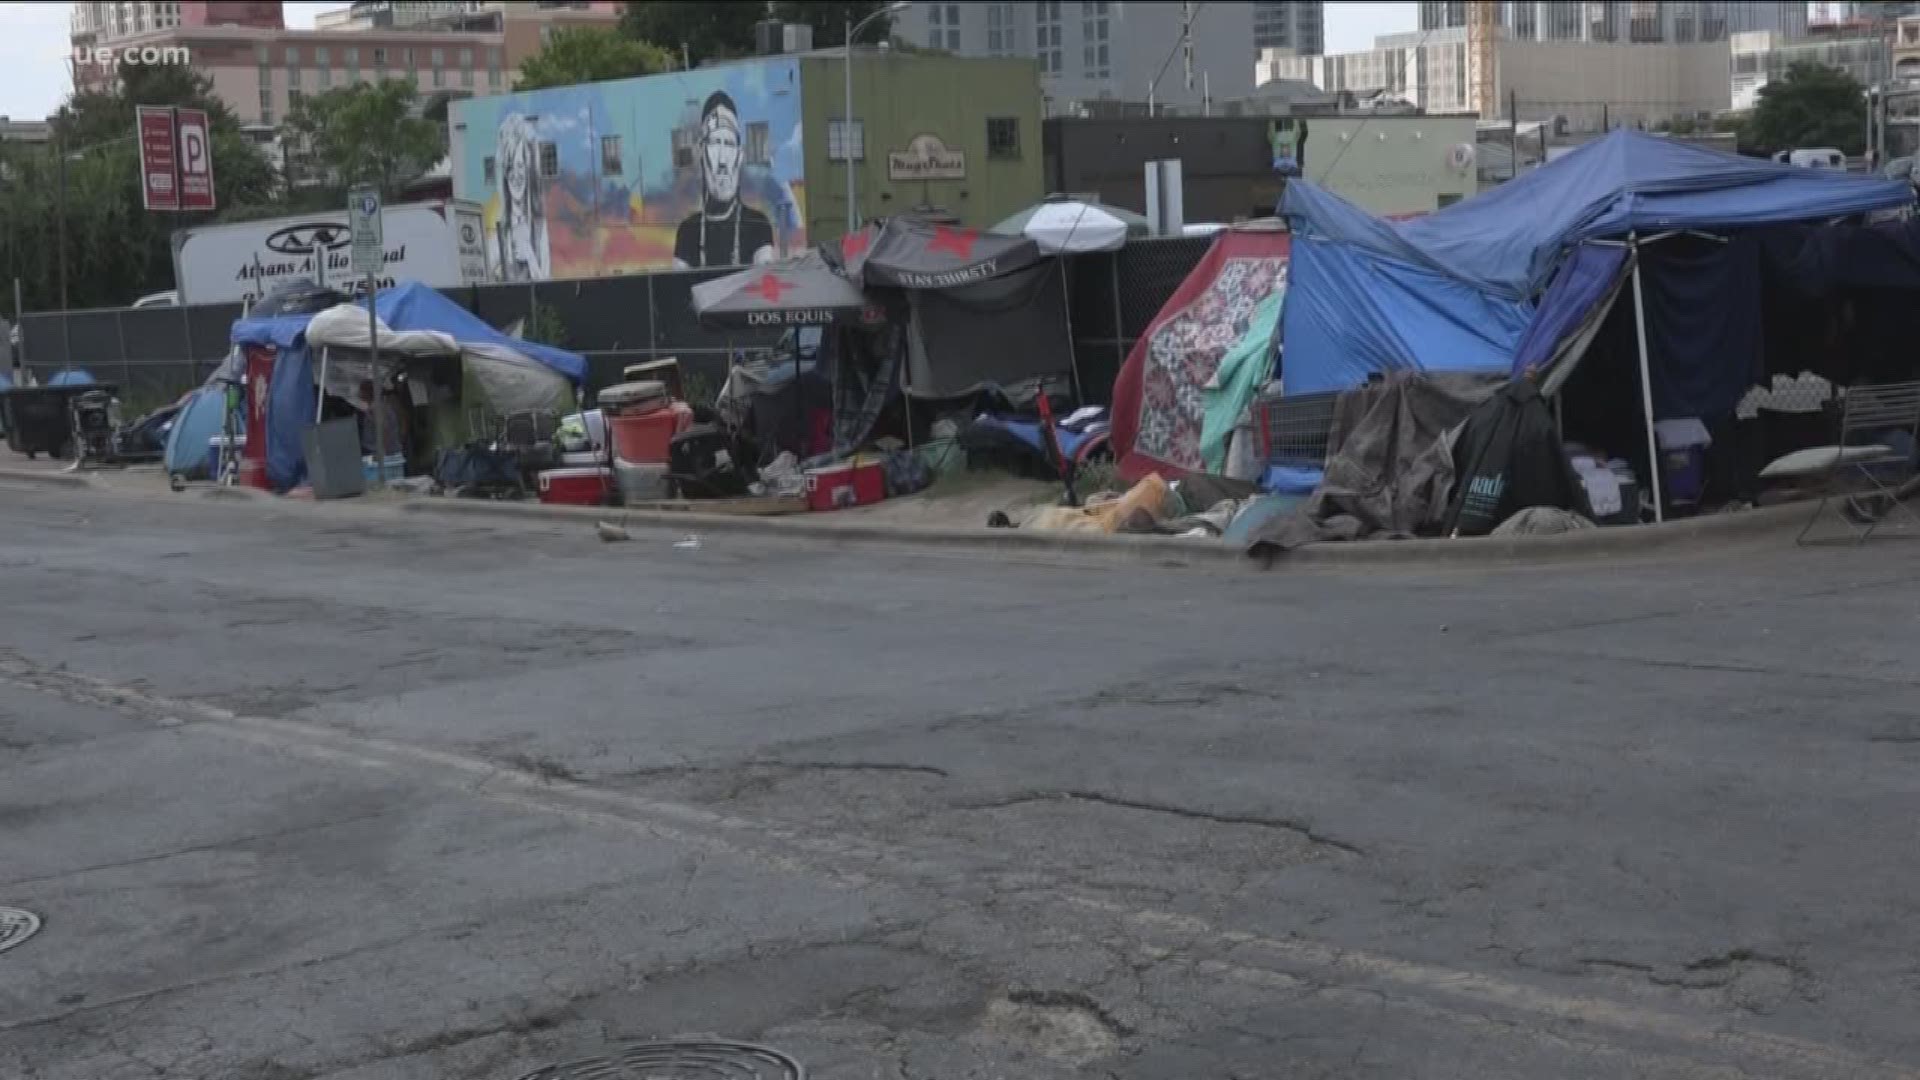 In an effort to make Downtown Austin safer, the city is narrowing the sidewalk around the ARCH homeless shelter.